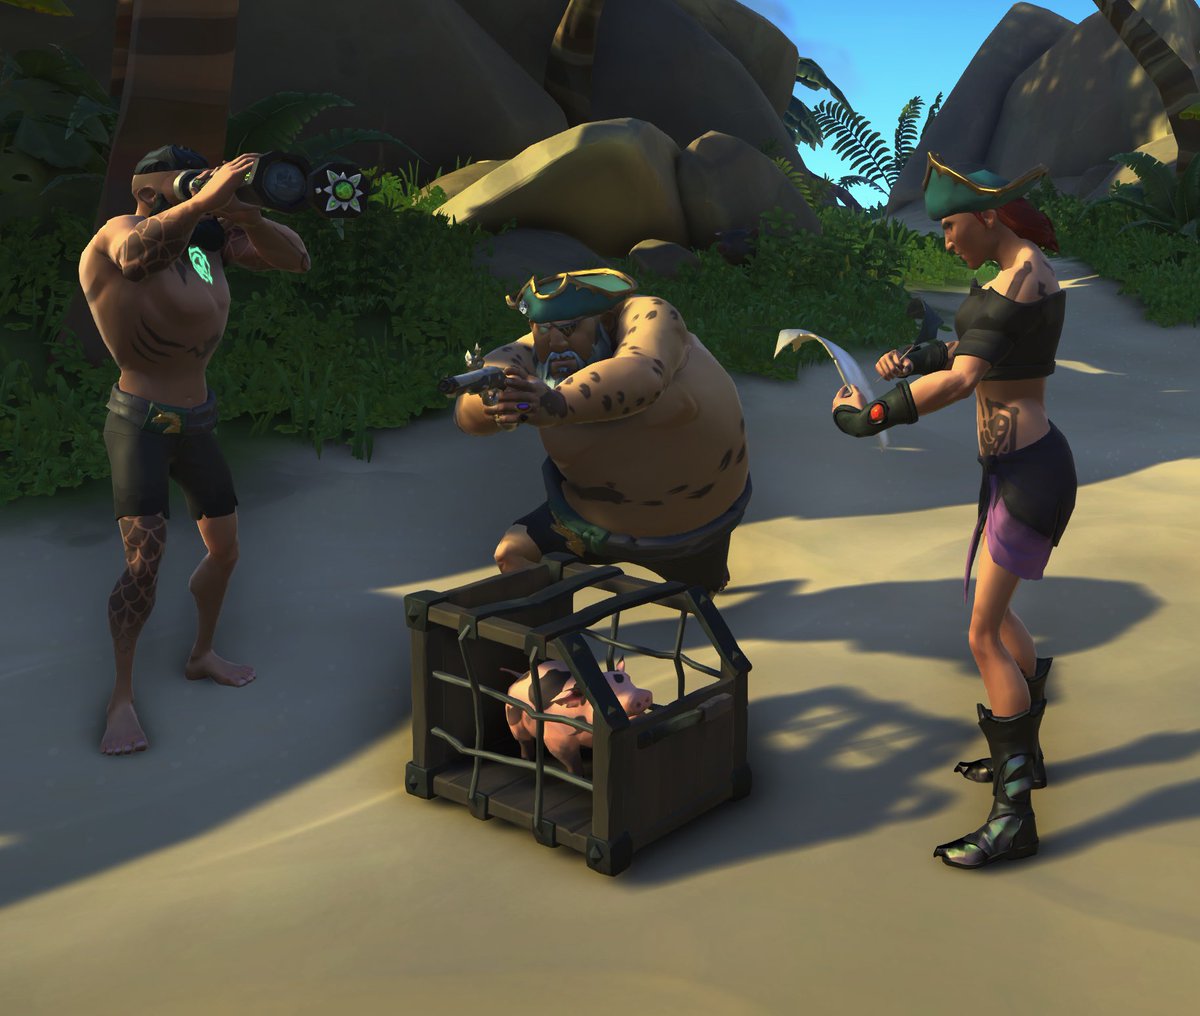 Pig Protection Guild “the Wigglenoses” got another complaint from the #SeaOfThieves piggies! 😱 So, tonight we will work together with The Underpants Brigade to keep those little ones safe 🥺 We’re hoping for a calm evening at twitch.tv/lokijimmyb 6pm cest